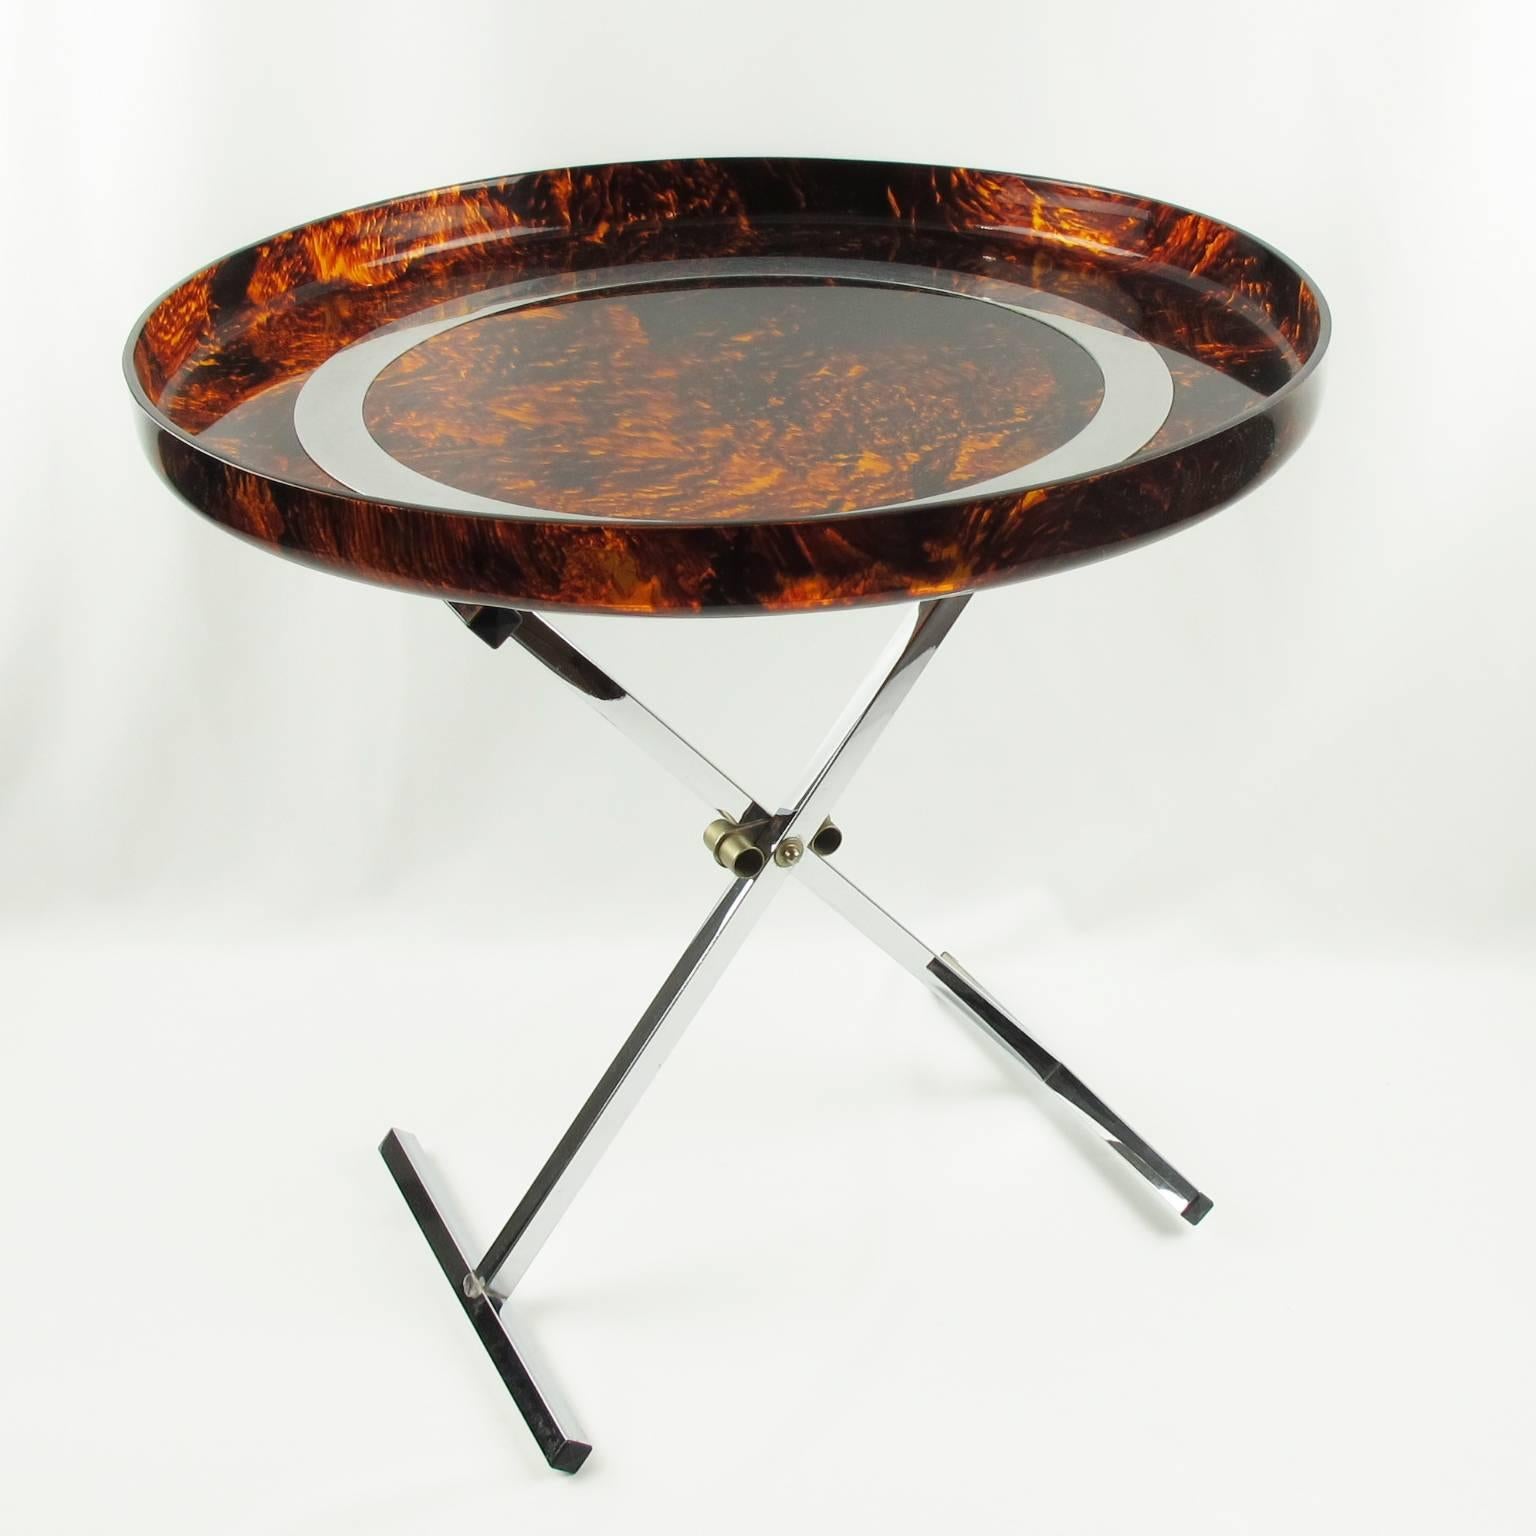 Lovely modernist folding tray table, circa 1980s. Extra large round shape butler tray with turned-up edges and central large chromed metal band inlaid. Thick Lucite with faux tortoiseshell color. Chromed metal folding X-stand. Perfect for barware,